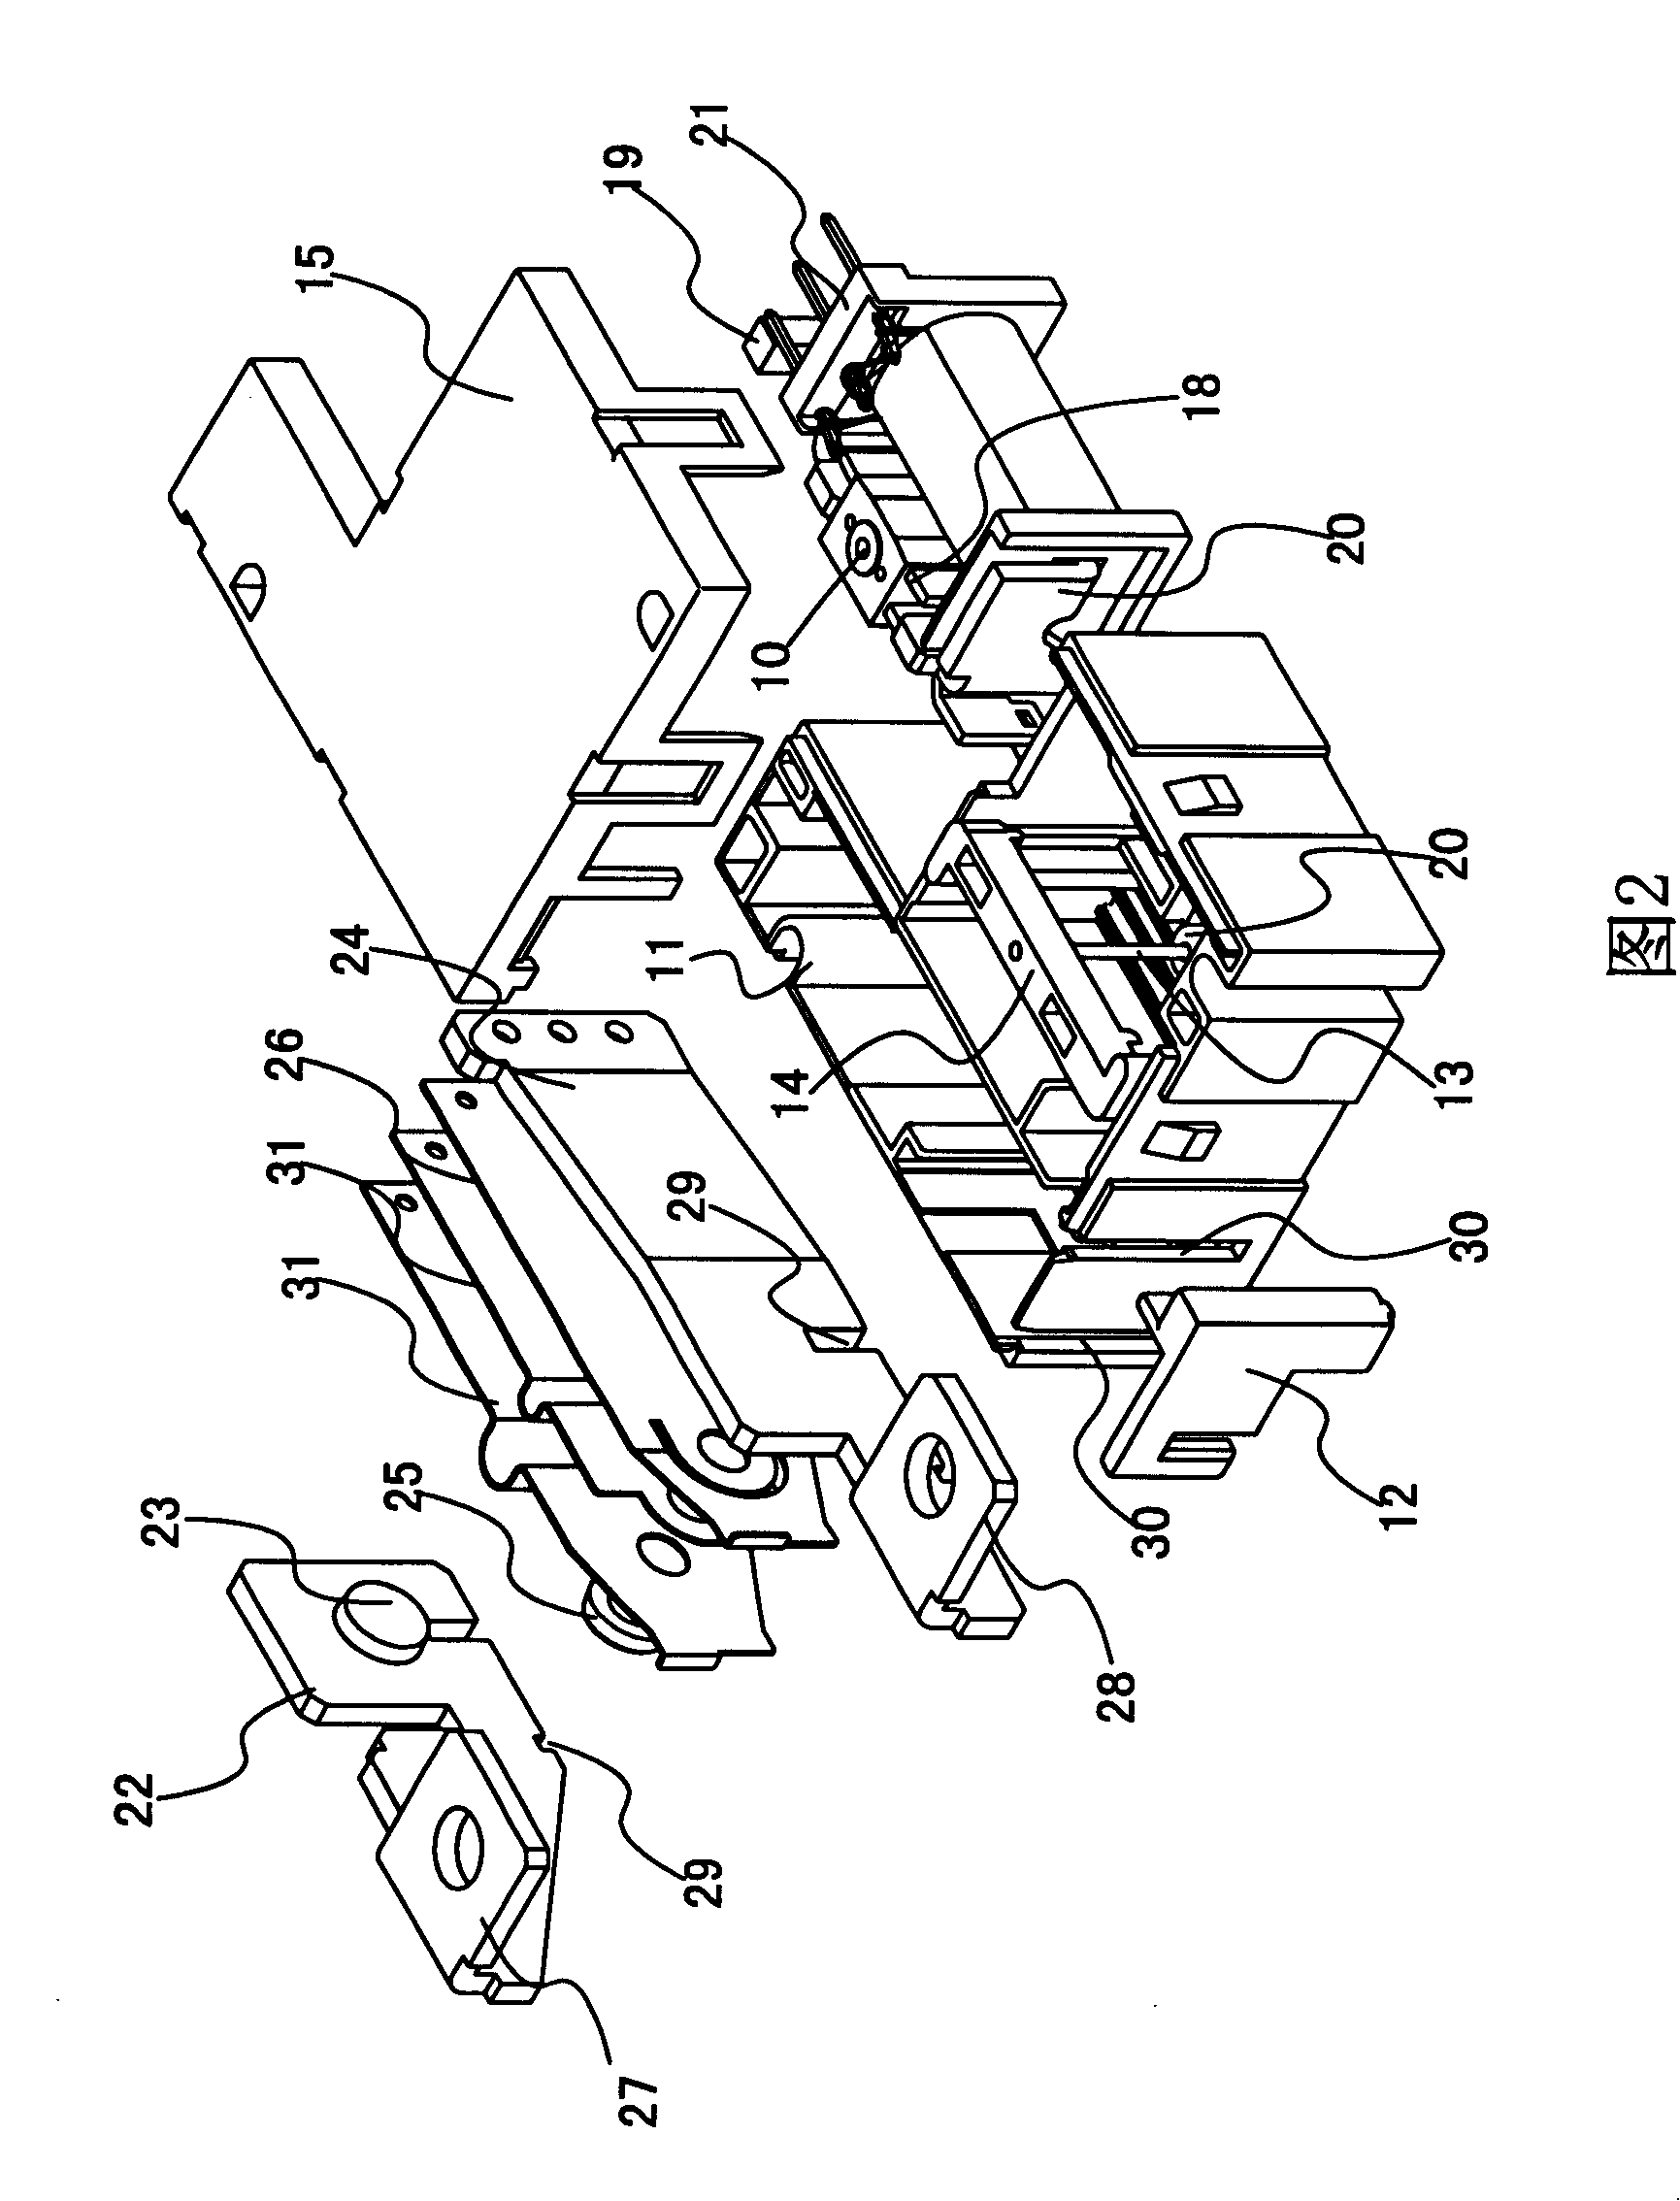 Electromagnetic relay resistant to electric repulsive force